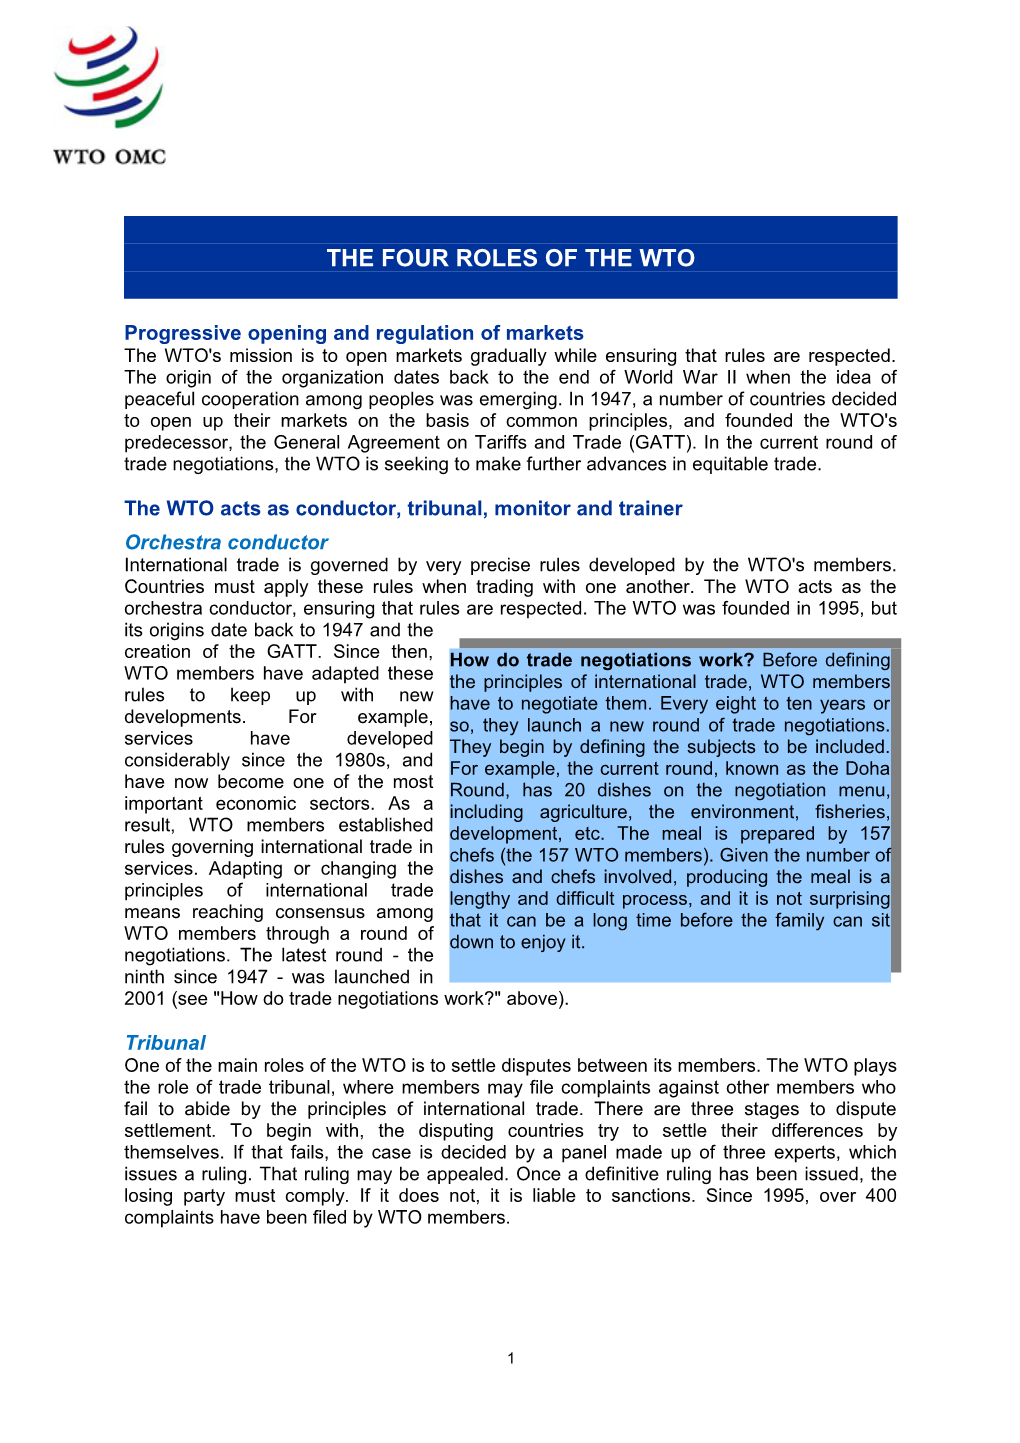 The Four Roles of the Wto